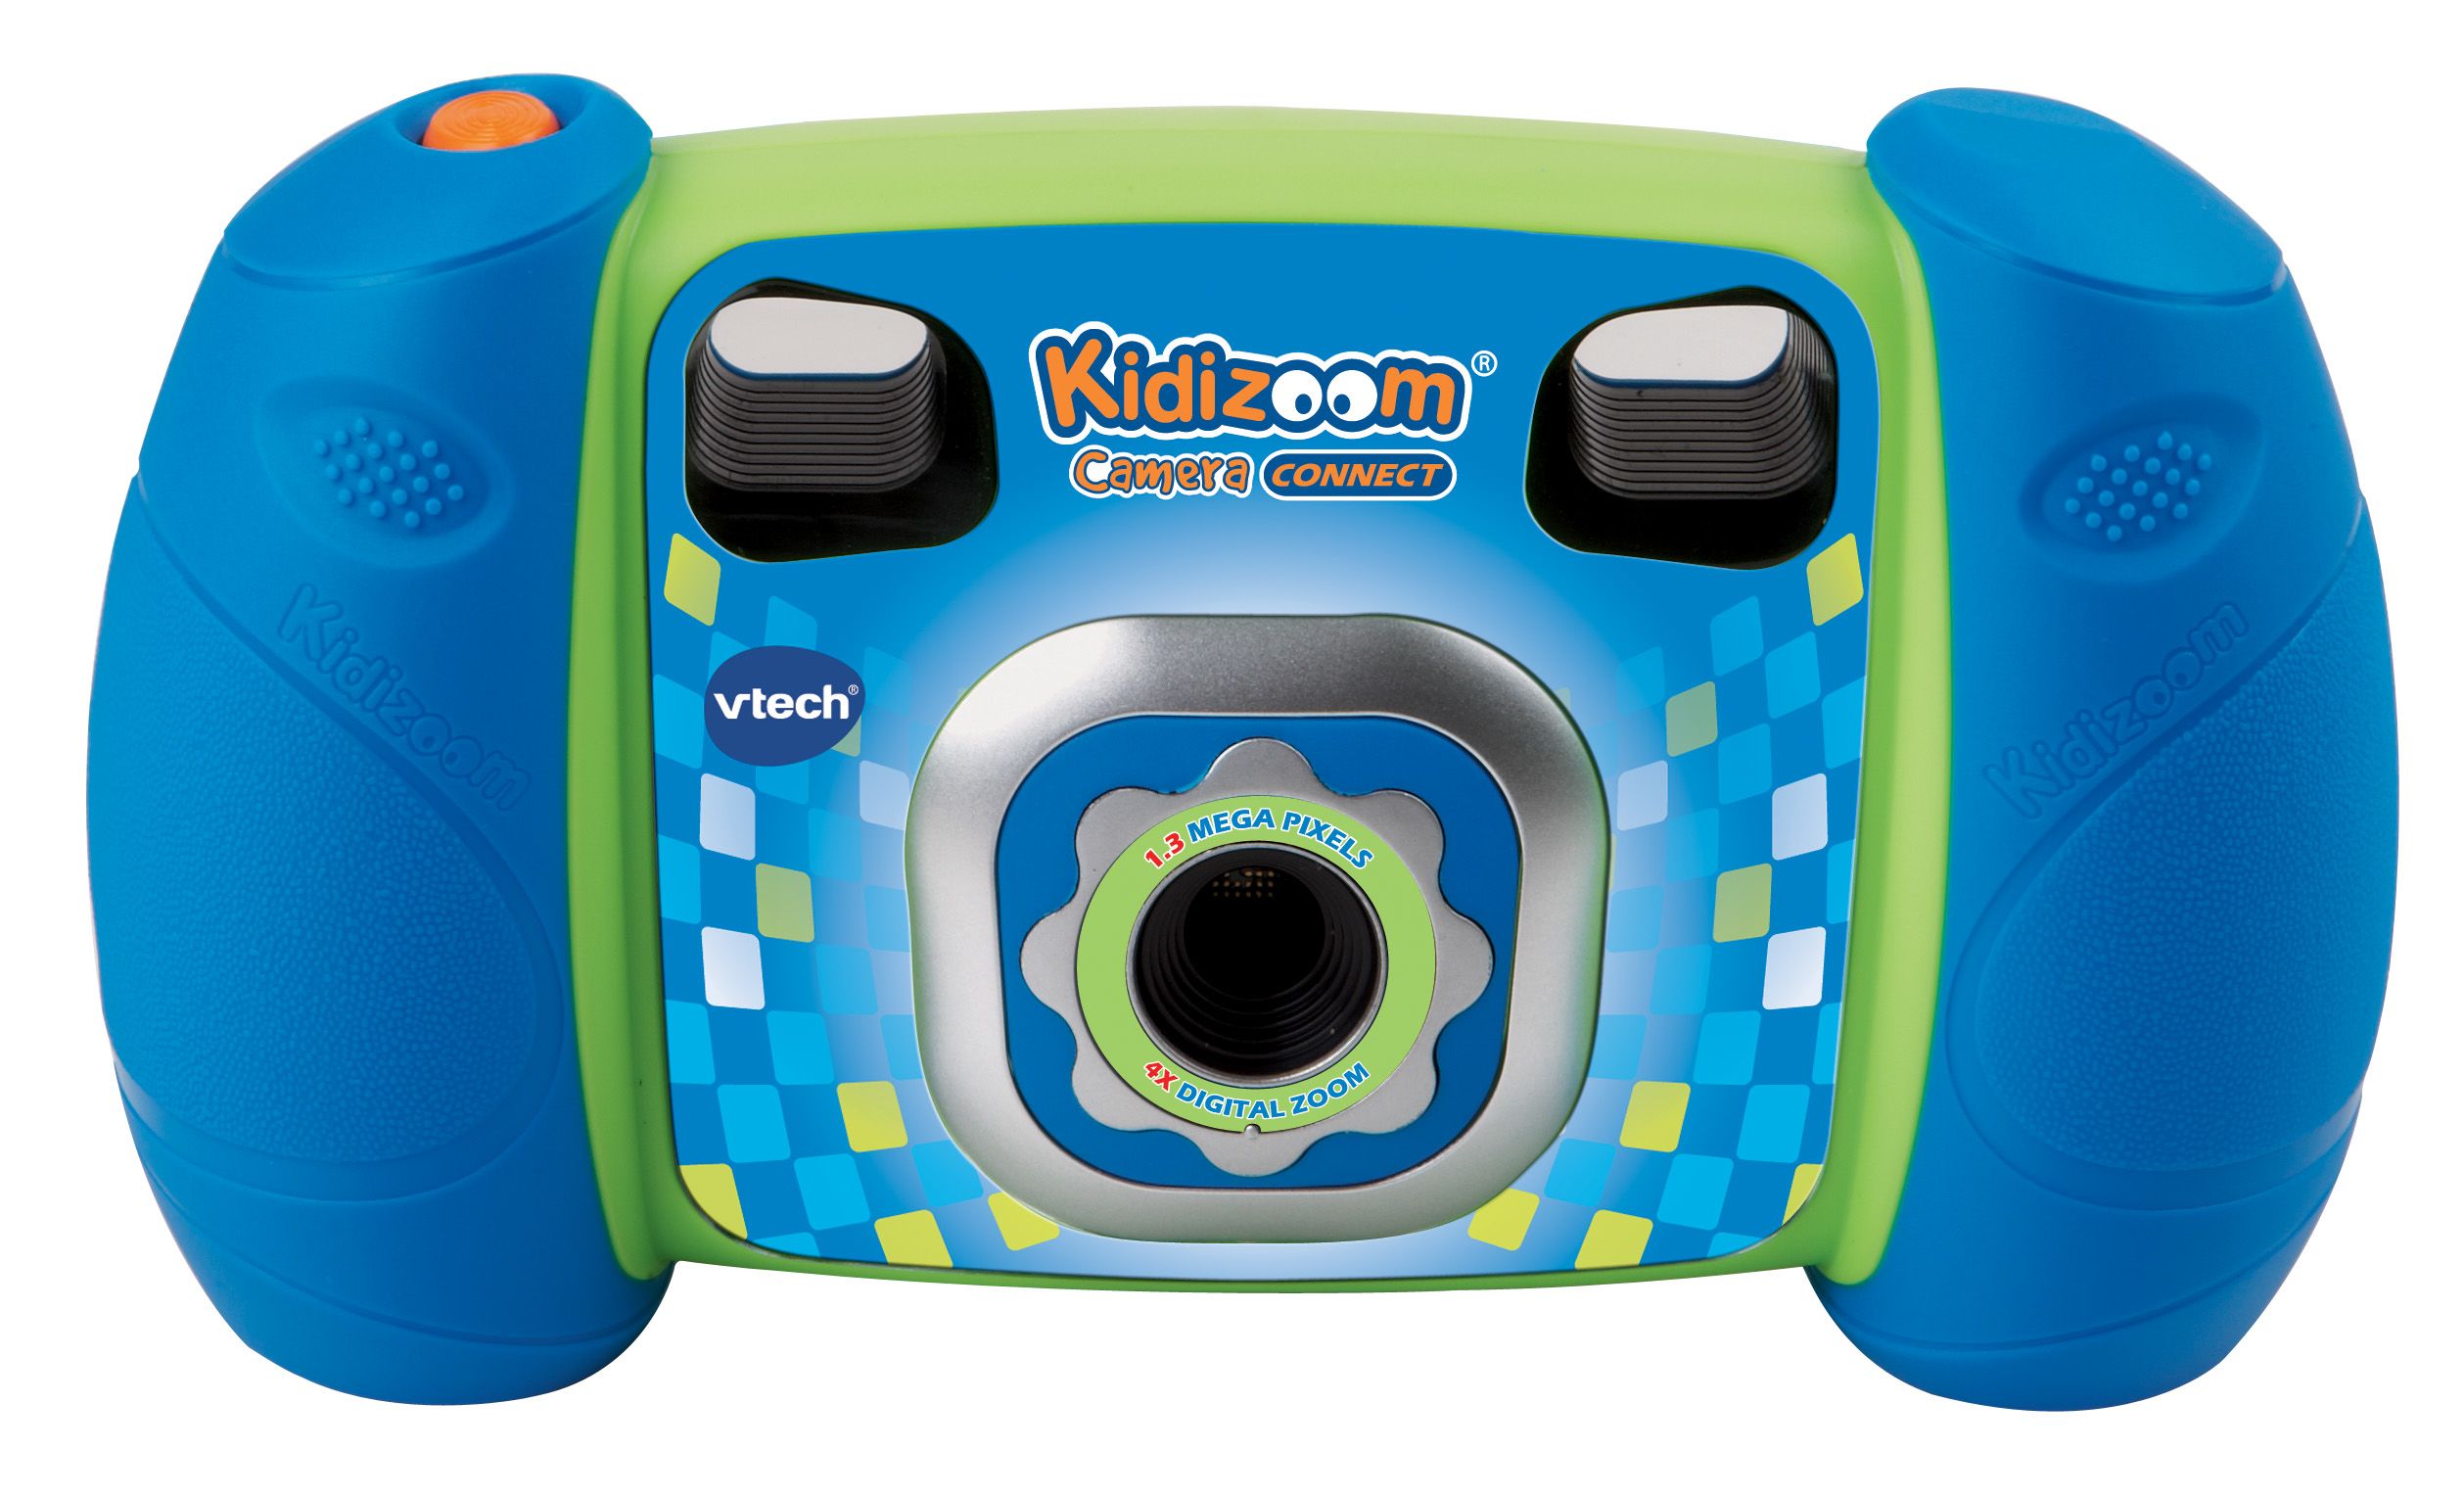 VTech Kidizoom Camera Connect - image 1 of 9